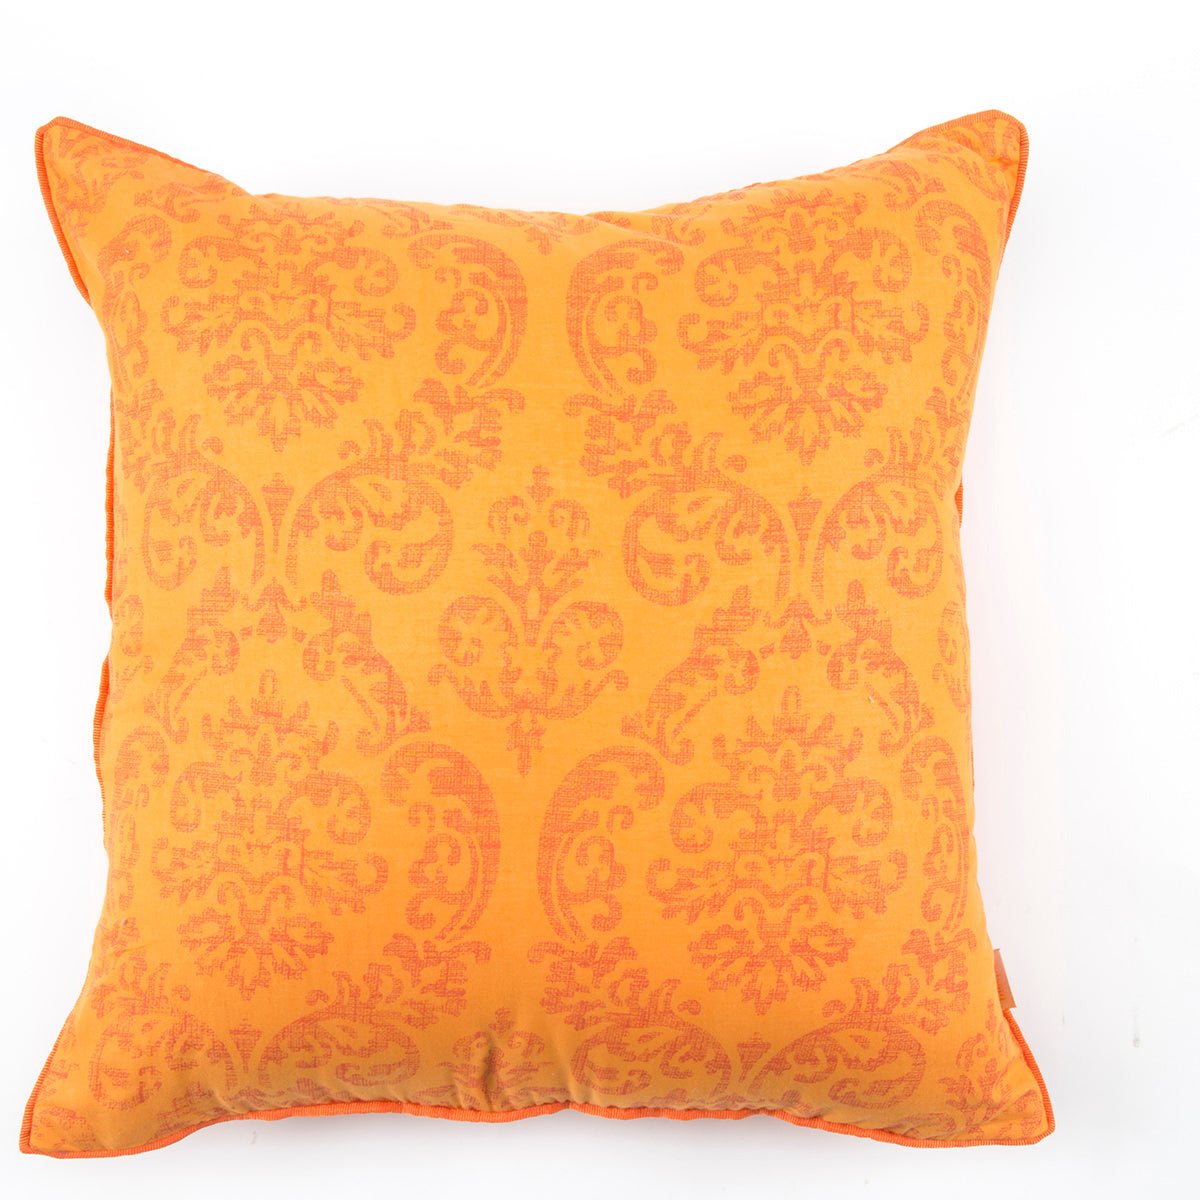 Reversible Voile Orange Medium 40x40 Cm Printed And Quilted Cushion Cover